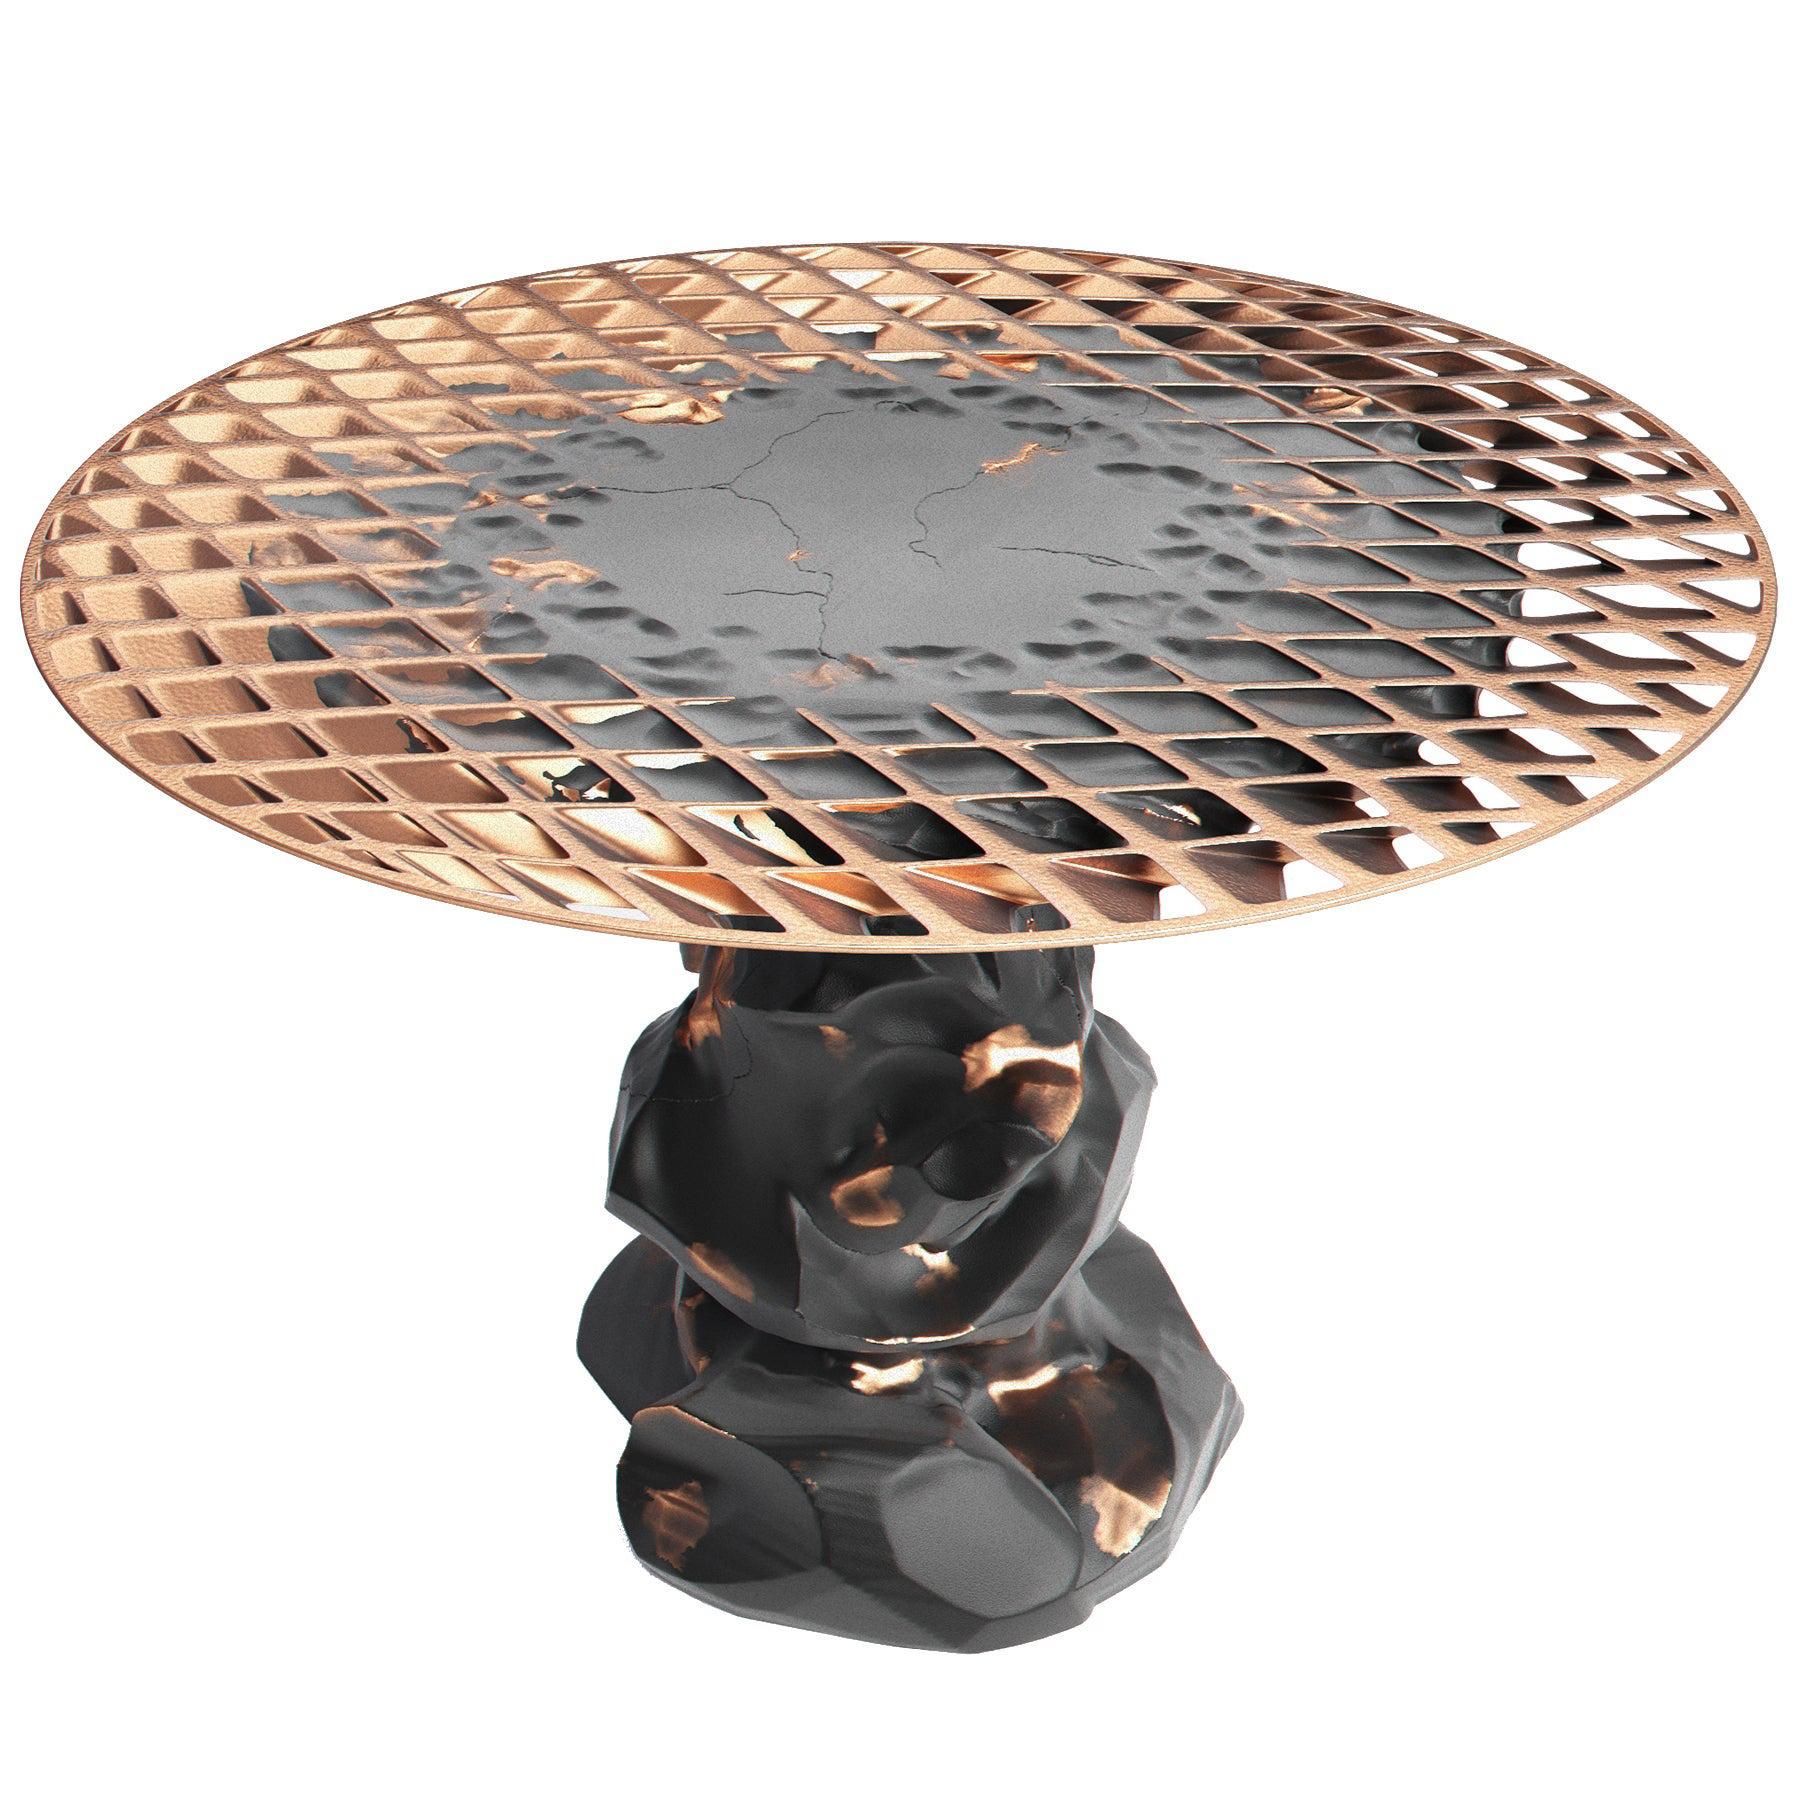 Metsidian Round Side Table/End Table in Obsidian and Copper Finish on Top